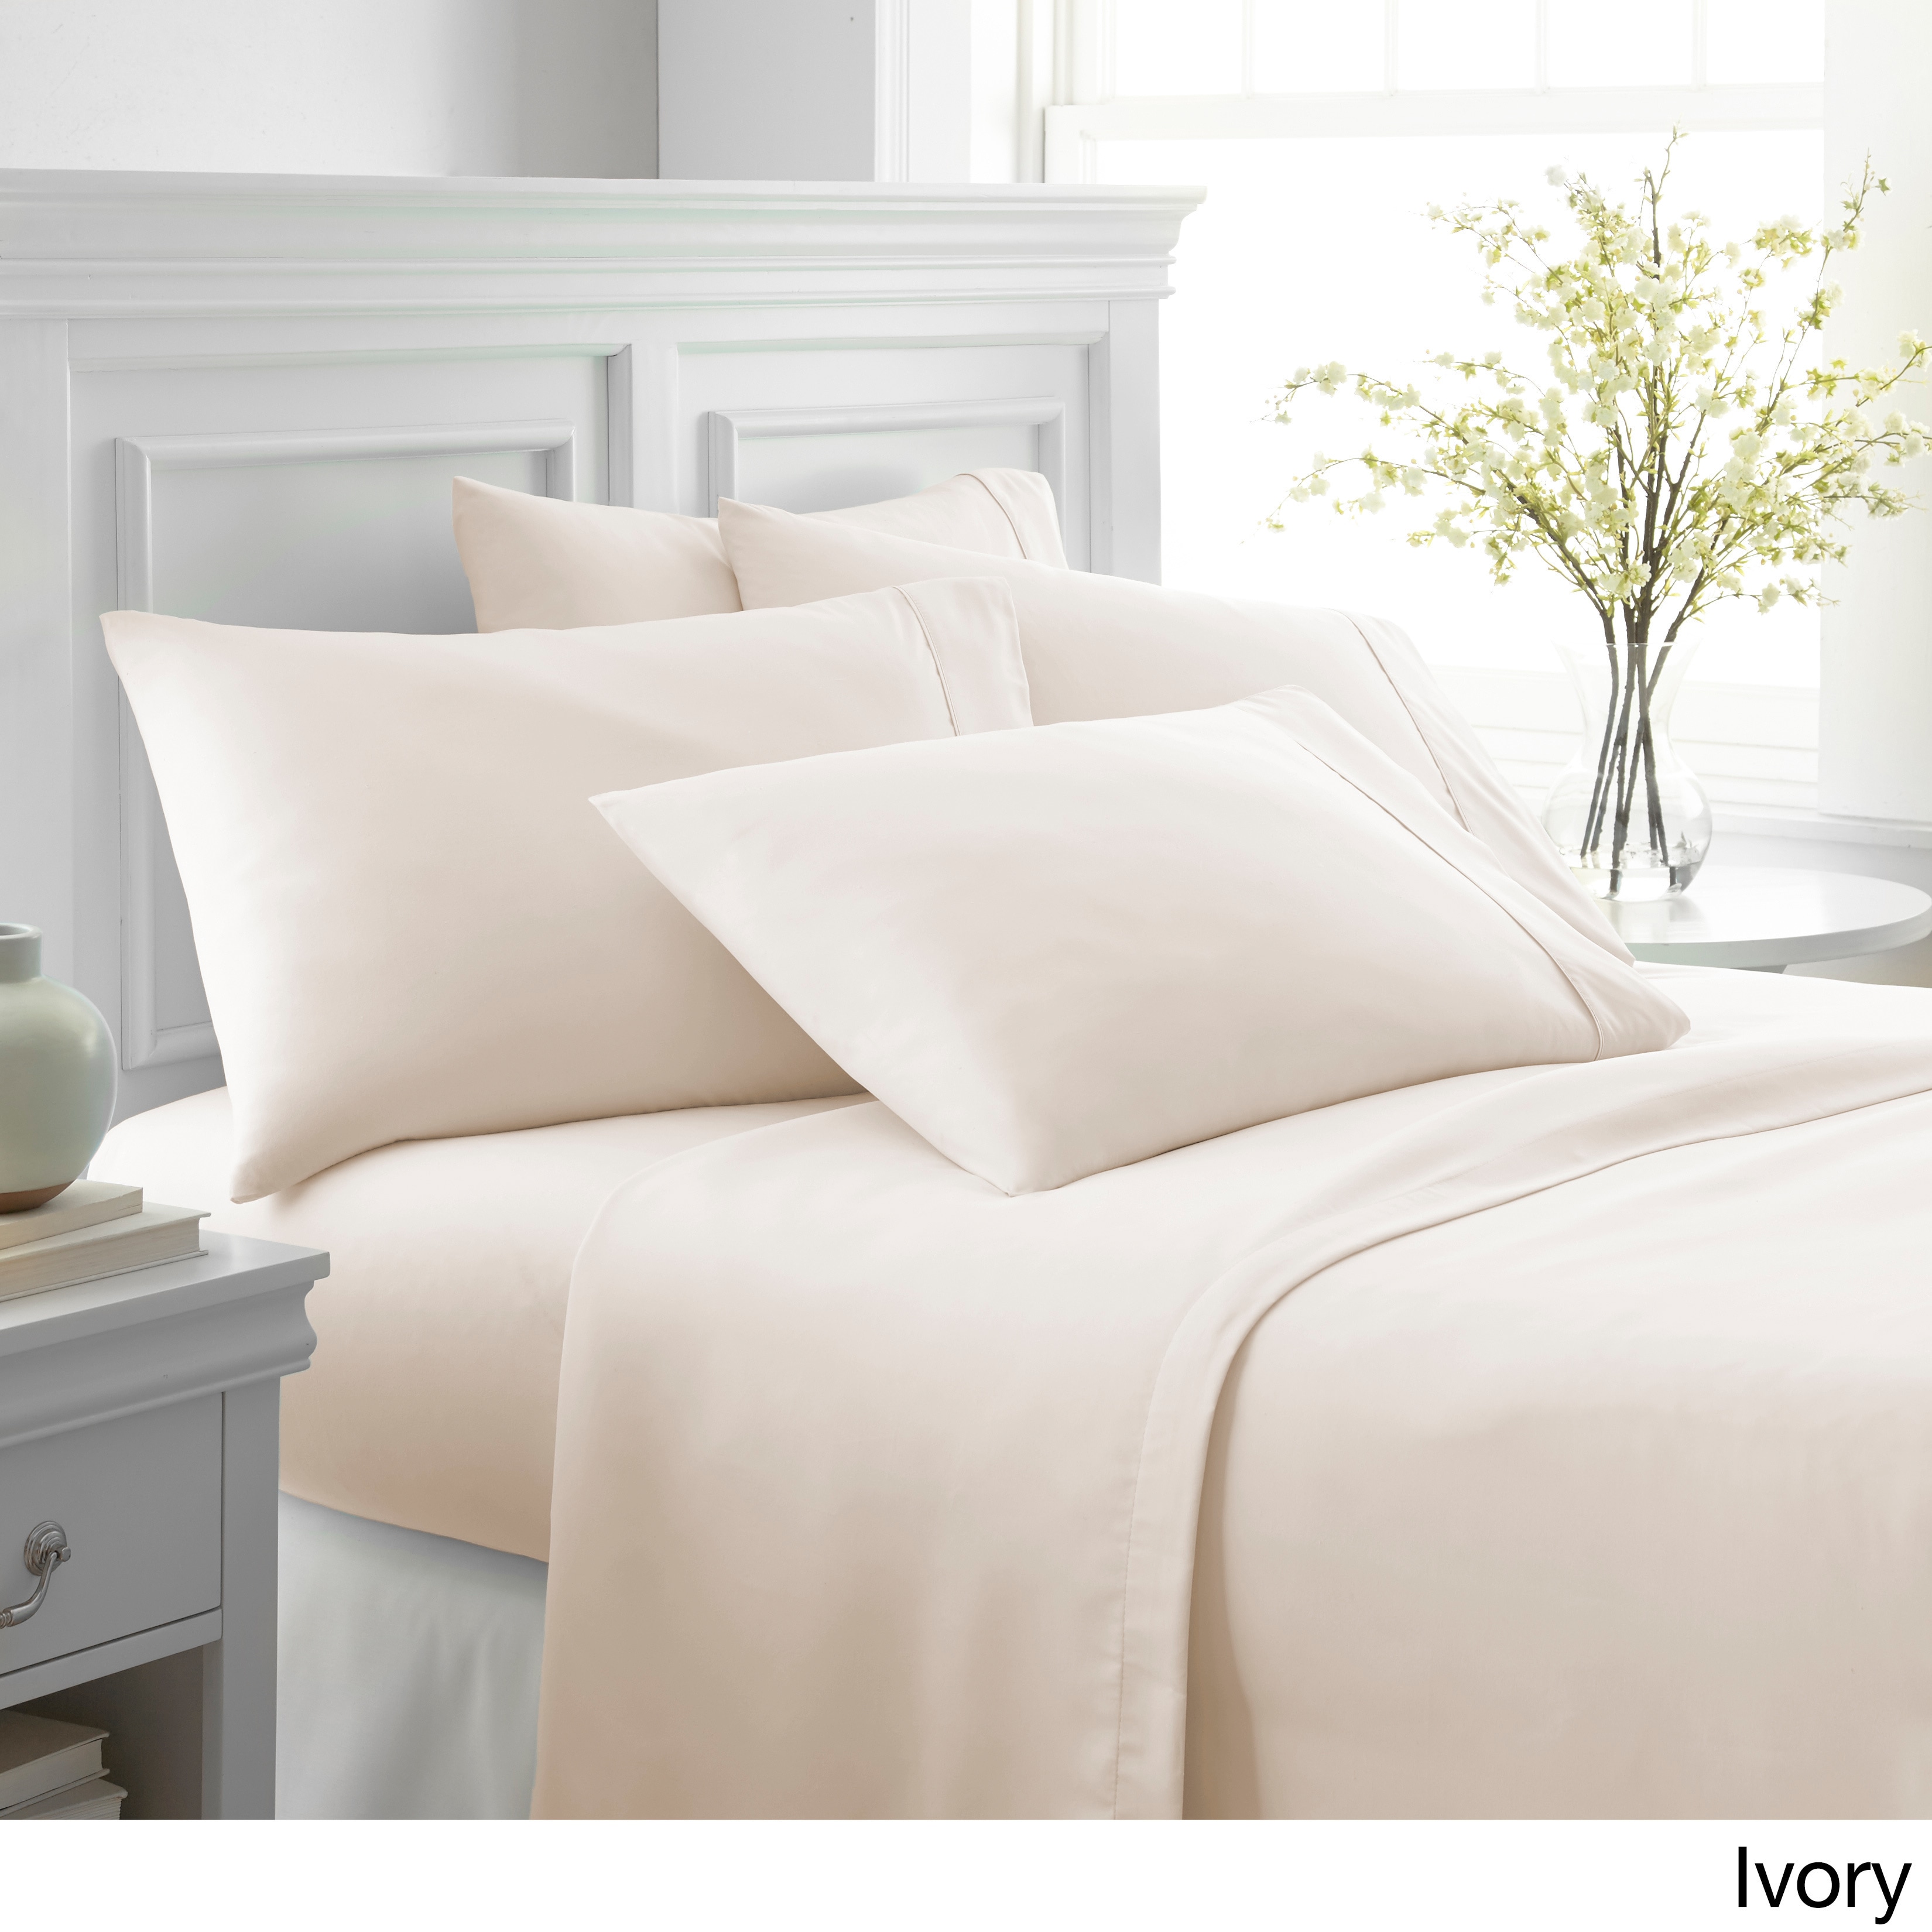 Simply Soft Premium Luxury 6 Piece Bed Sheet Set - image 2 of 5